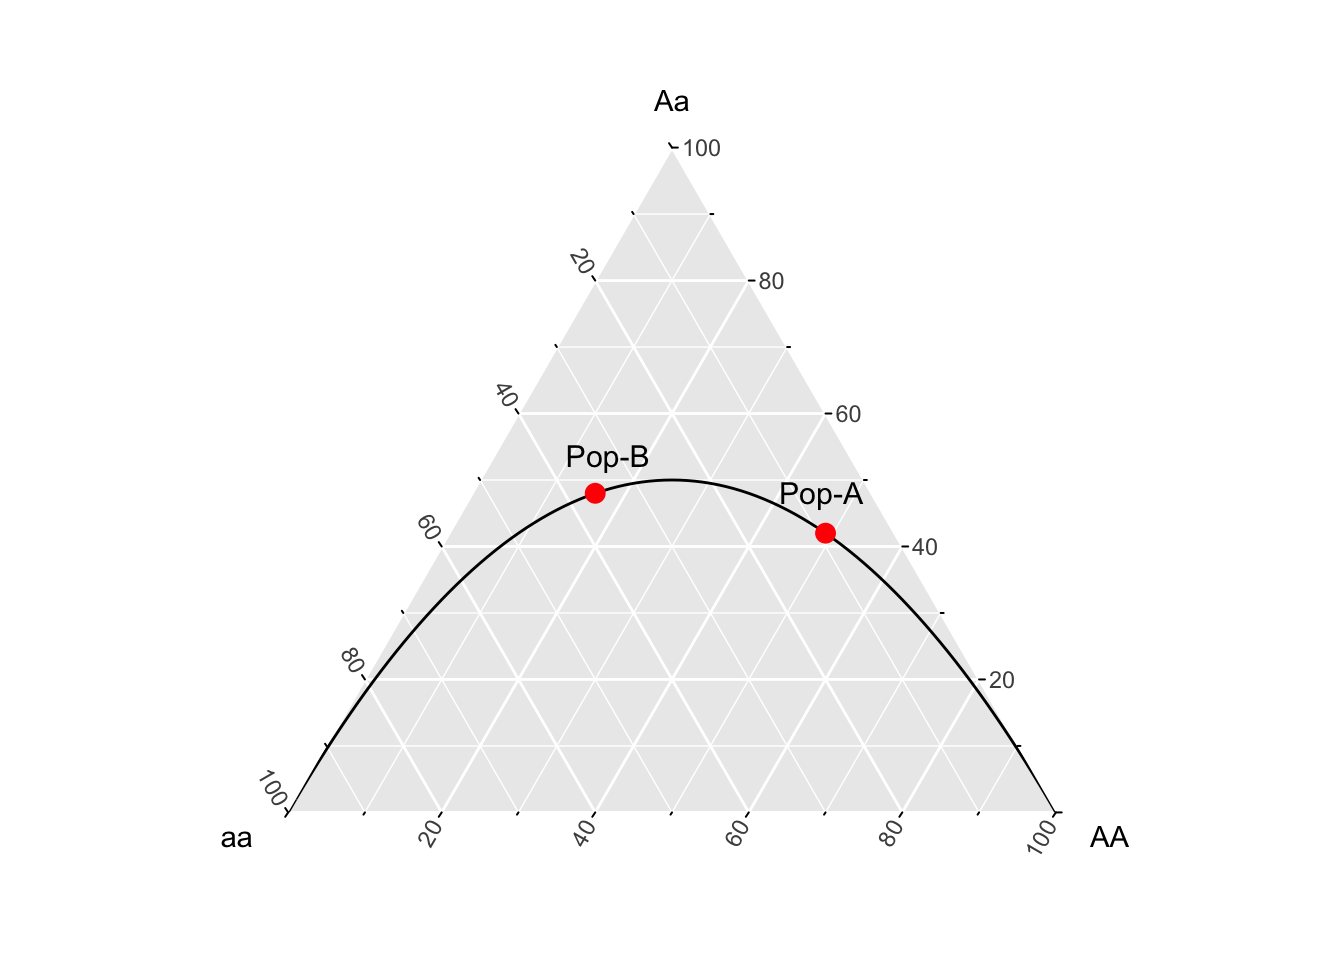 A ternary plot, or de Finetti diagram after Edwards (2000), representing expected genotype frequencies under Hardy Weinberg equilibrium (line) along with the points for the two example populations (in red).